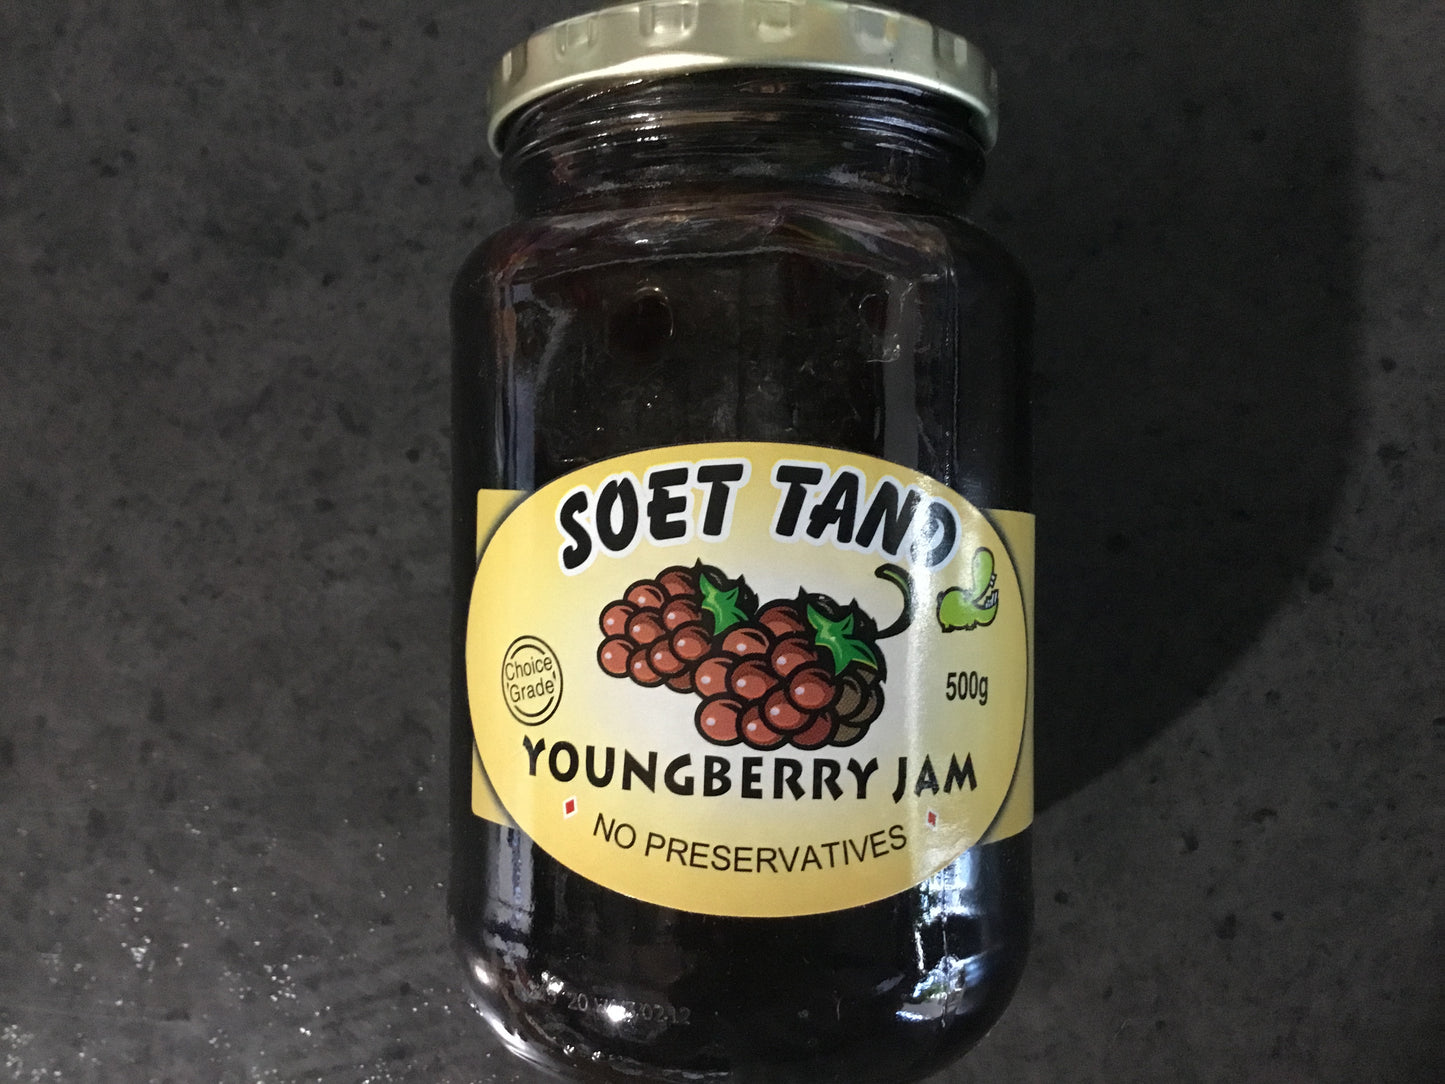 SoetTand Youngberry Jam 500g